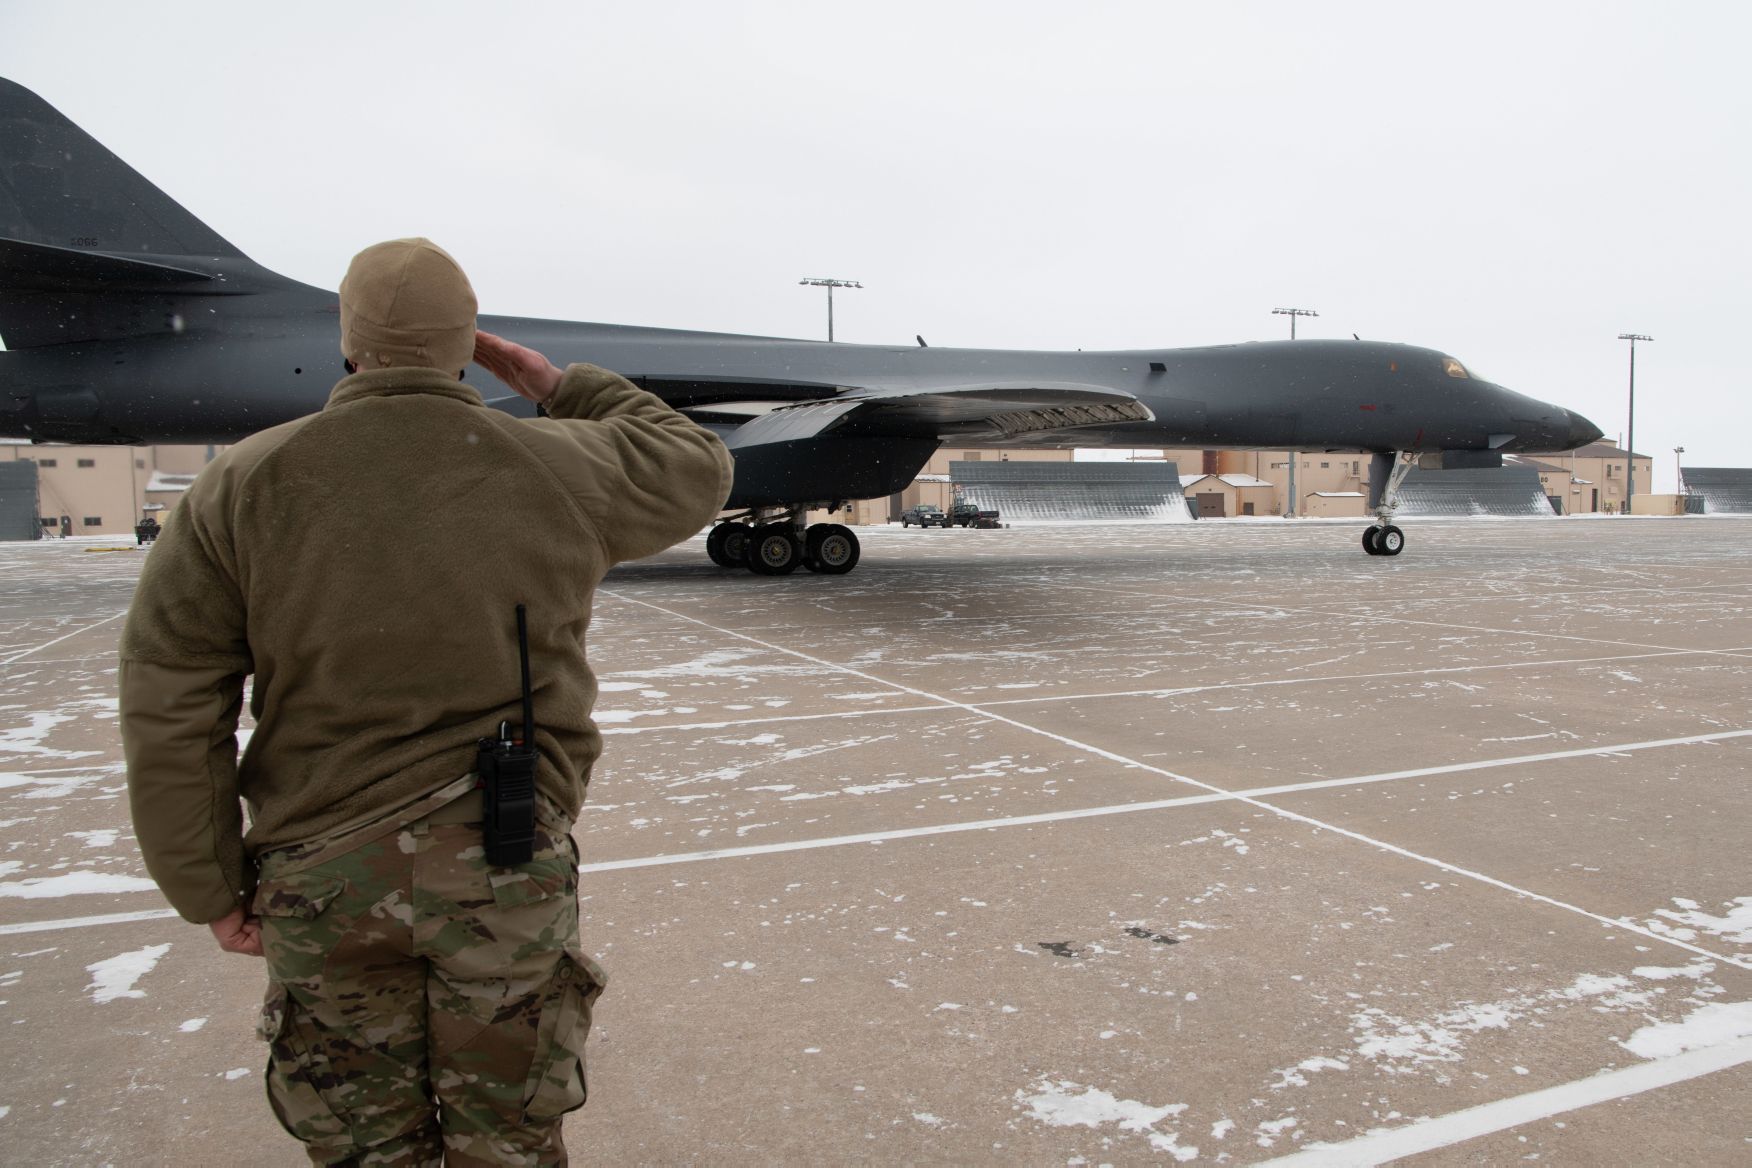 The first of 17 B-1Bs to be retired by the USAF prepares to depart from its home station of Ellsworth AFB in South Dakota. The service fields 62 B-1Bs, meaning that 45 will remain operational once this initial divestment is complete (though four of the 17 will be stored in a reclaimable condition, should they be needed again). (US Air Force)